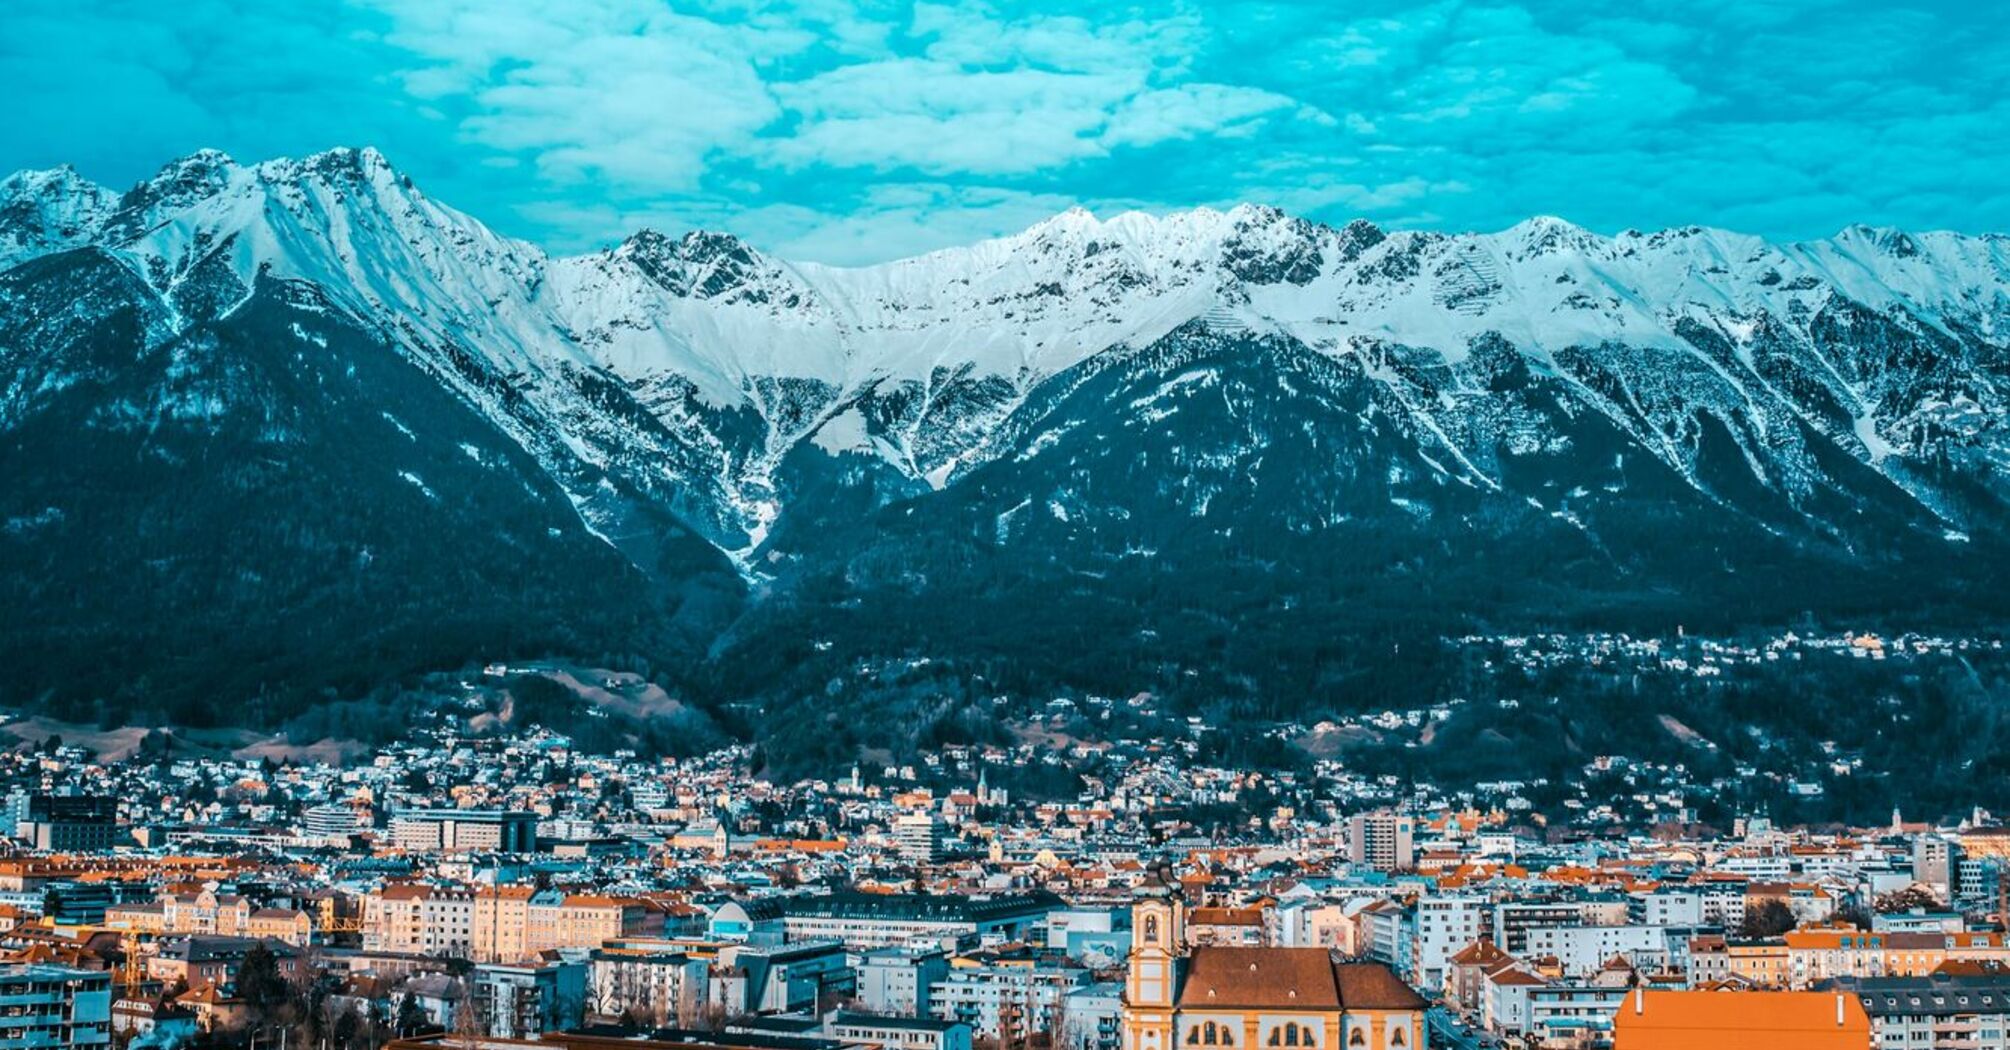 View of Innsbruck with snow-capped mountains in the background